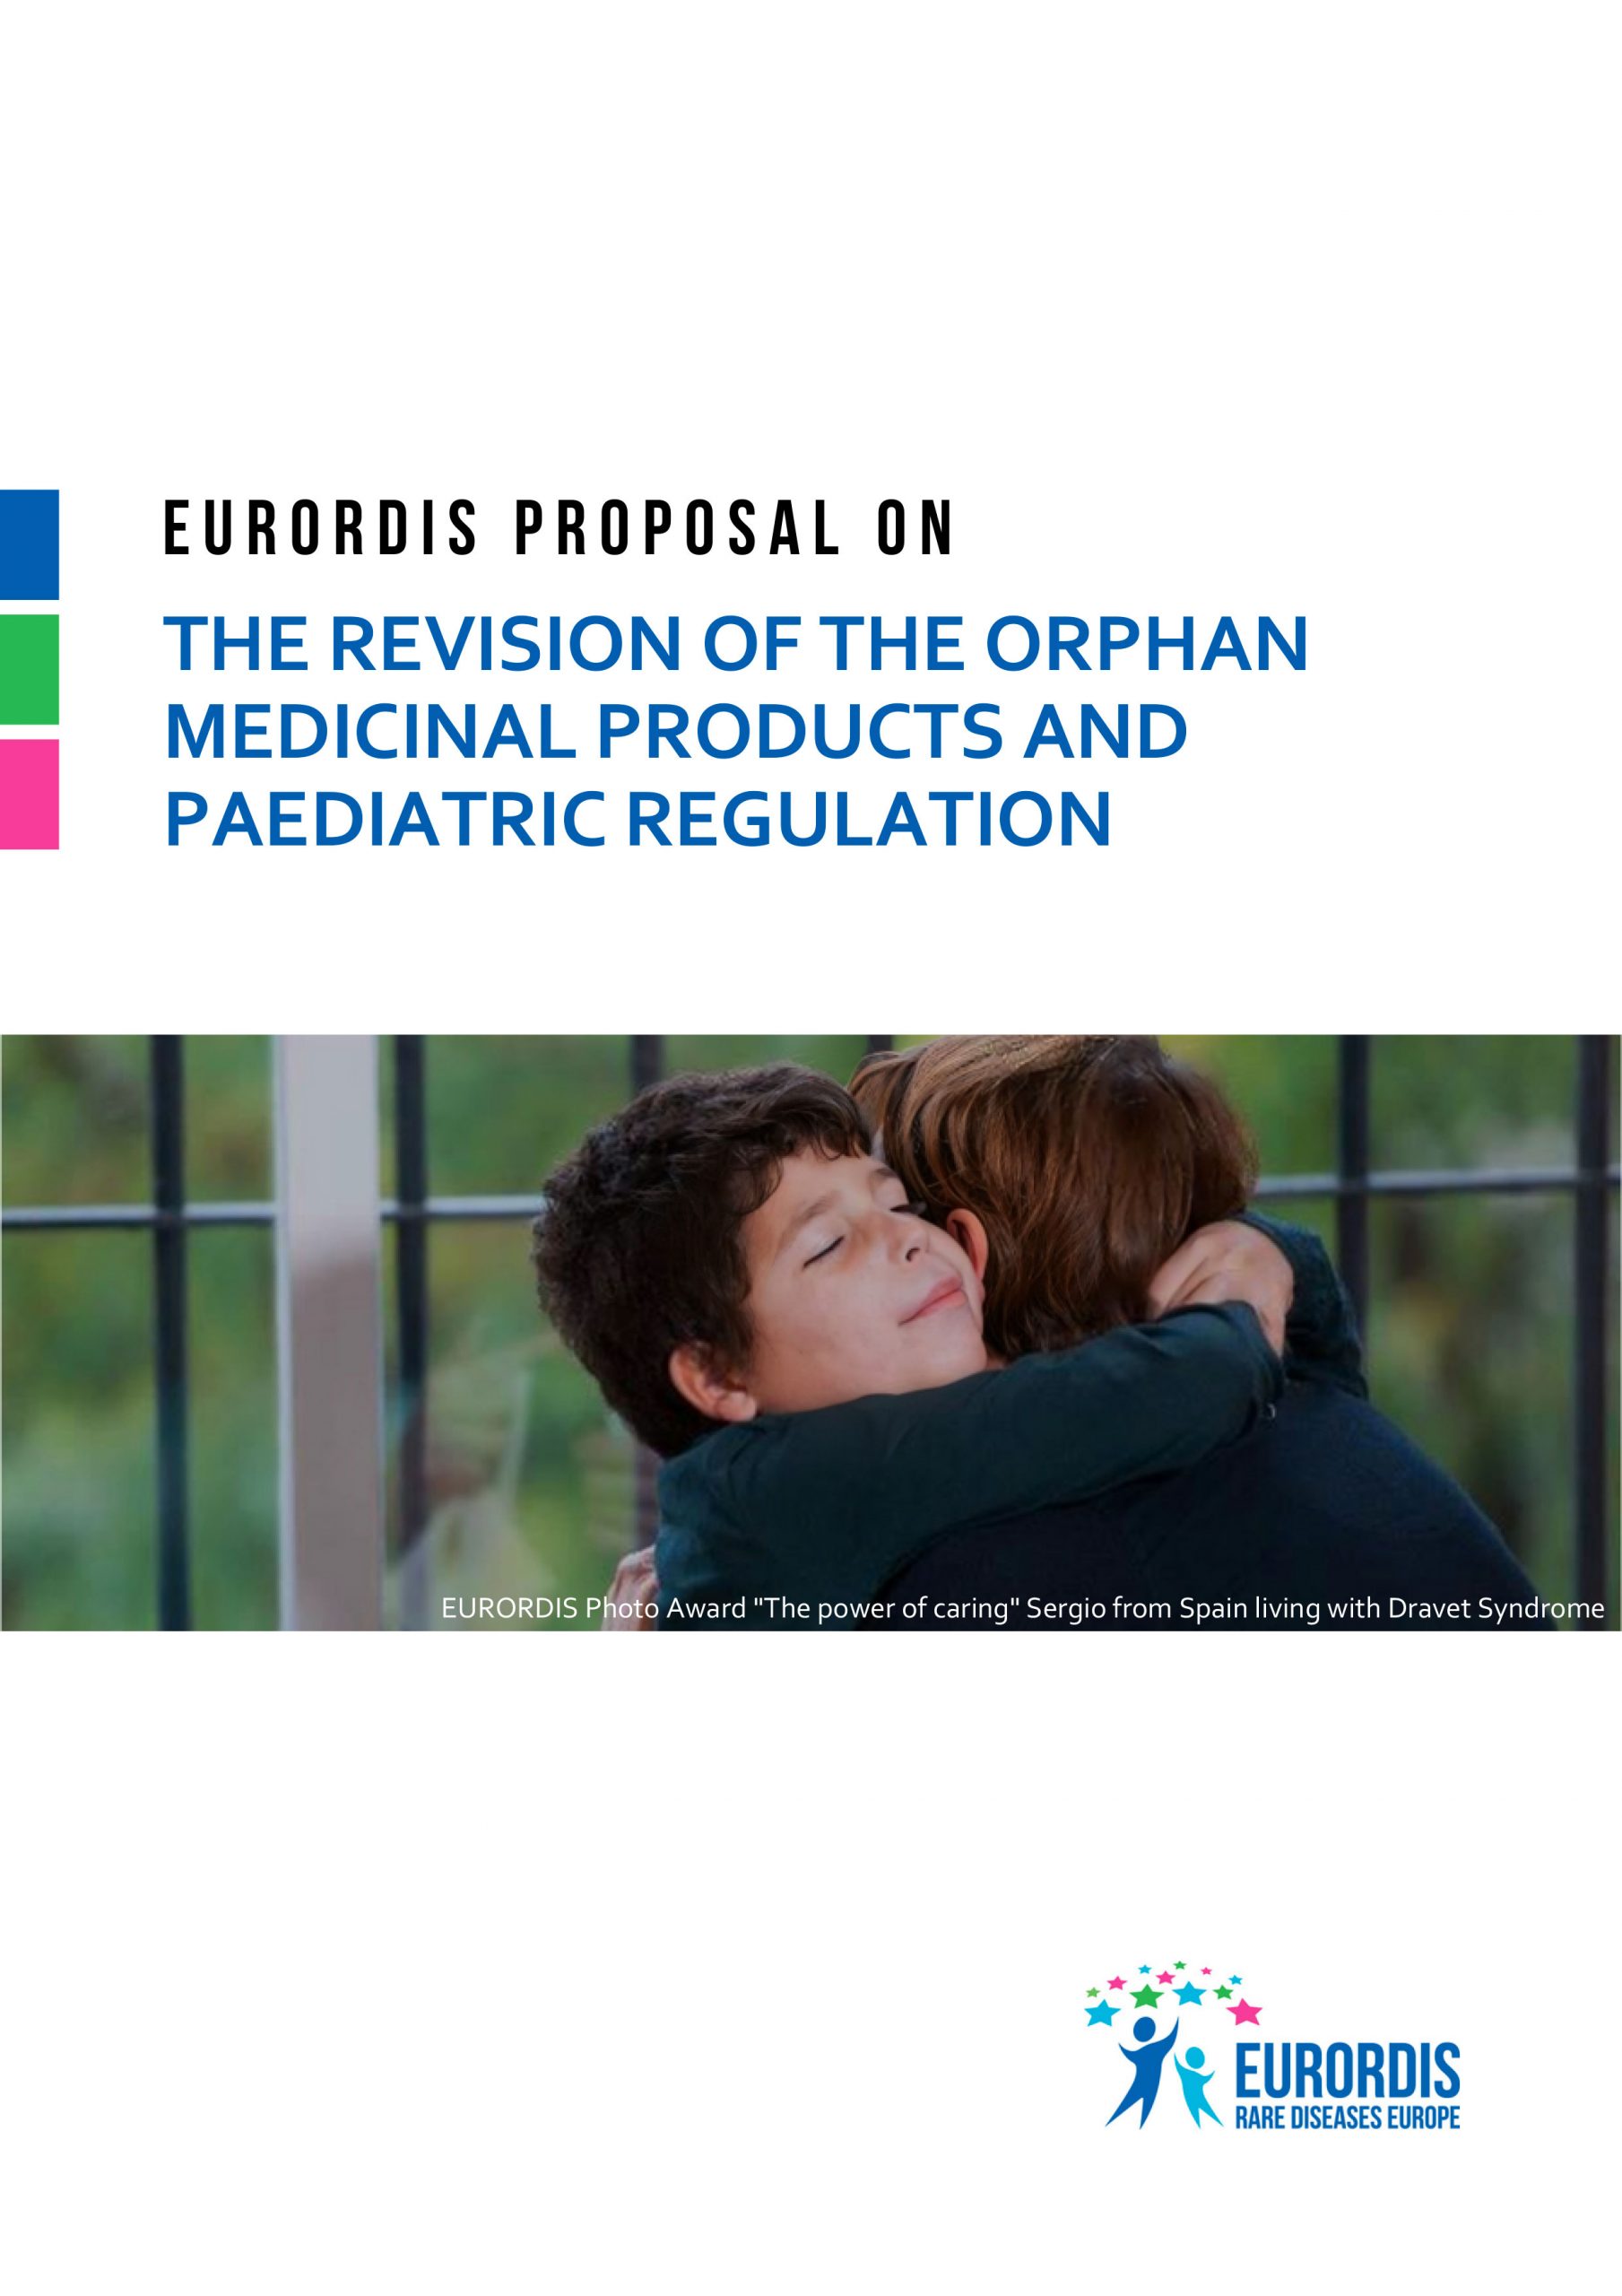 <strong>EURORDIS Proposal on the Revision of the Orphan Medicinal Products and Paediatric Regulation</strong>